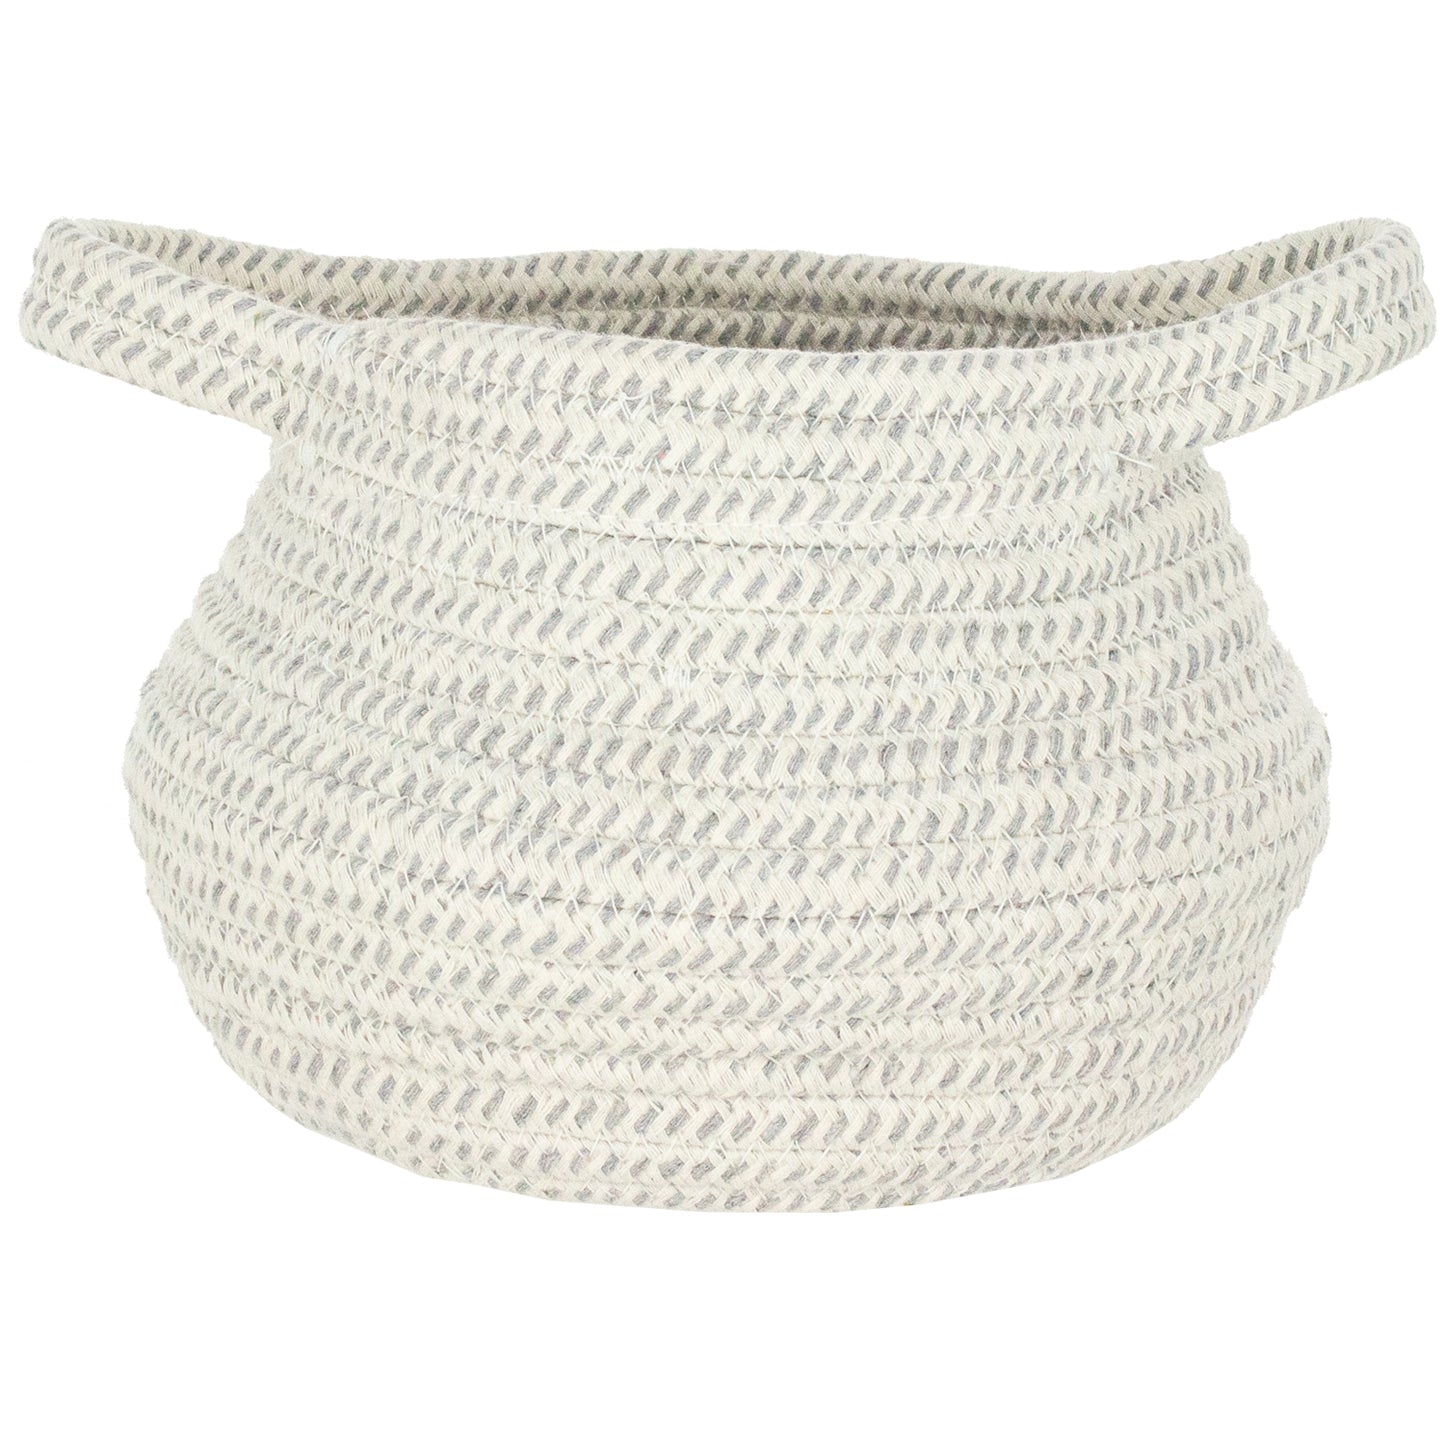 Heathered Grey Cable Basket